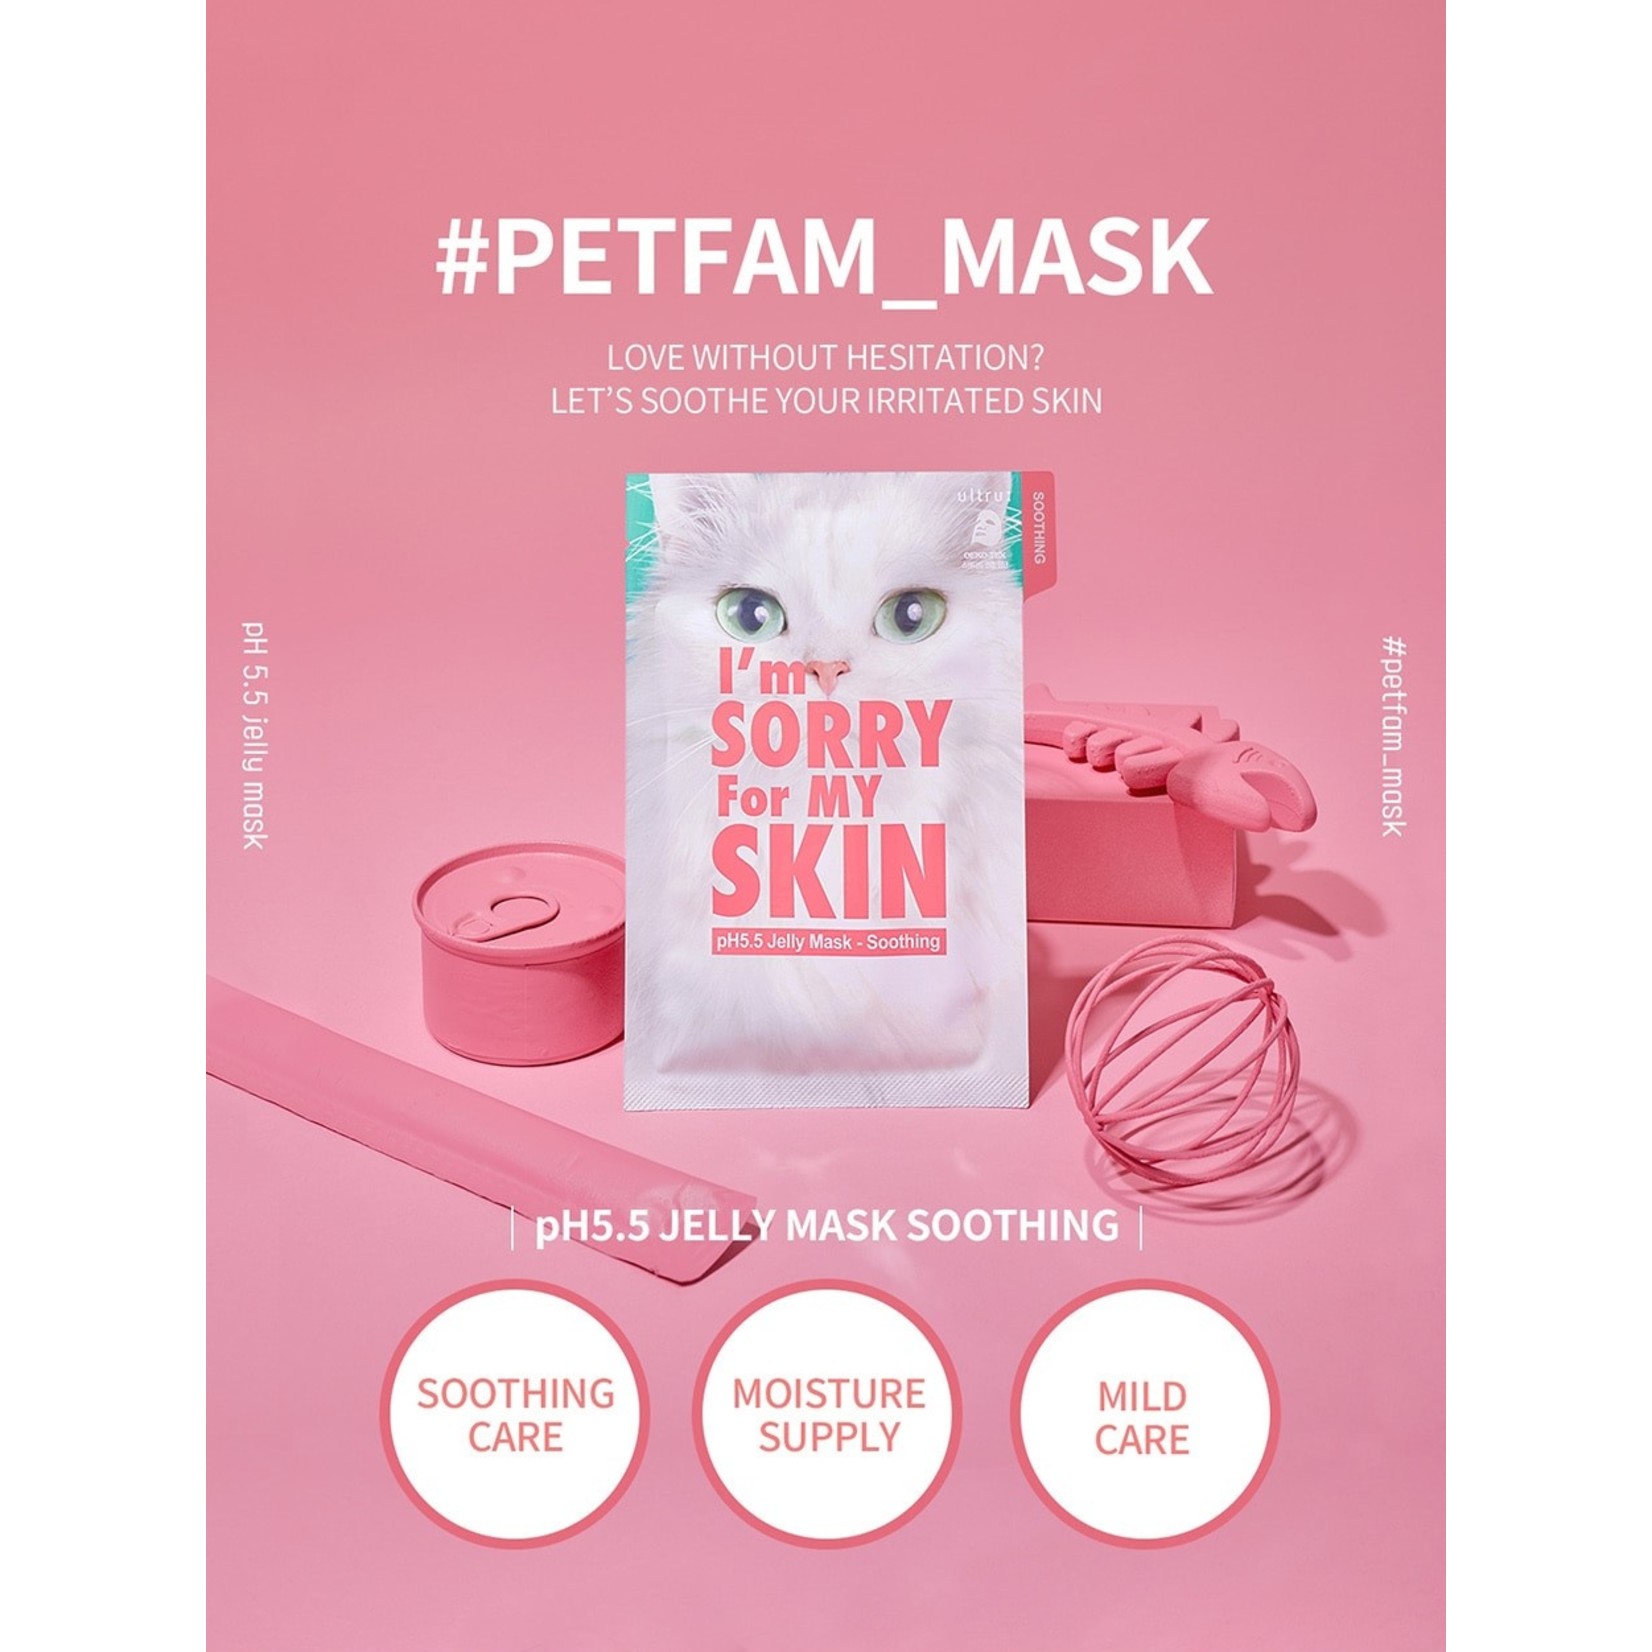 I'm SORRY For MY SKIN Jelly Sheet Mask Trial Mix (3+1 pcs)